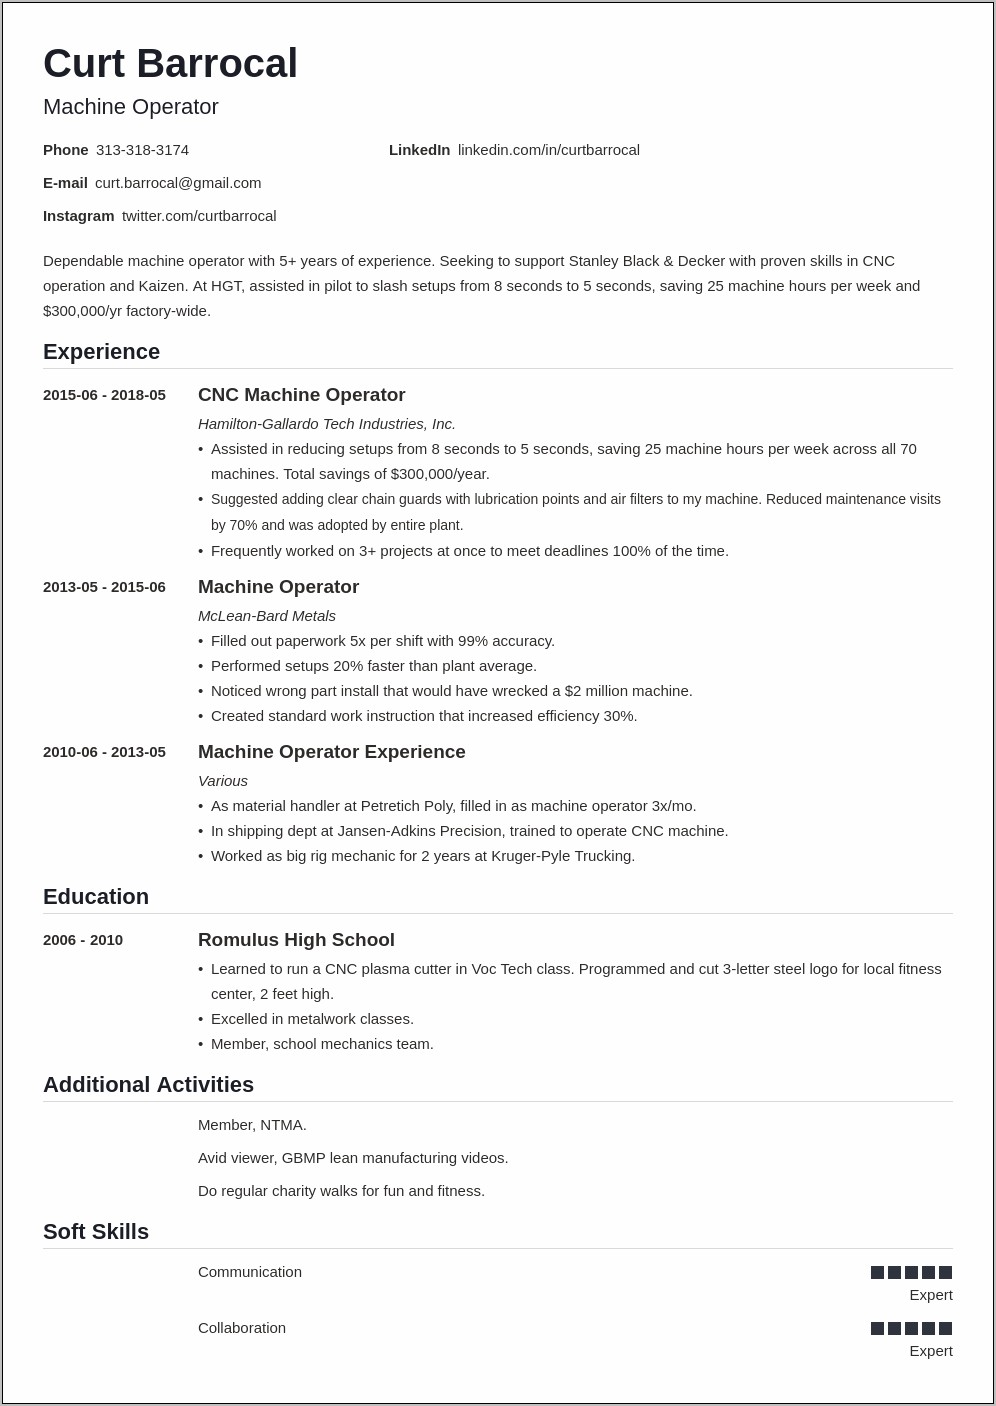 Resume Objective Statement Examples Manufacturing